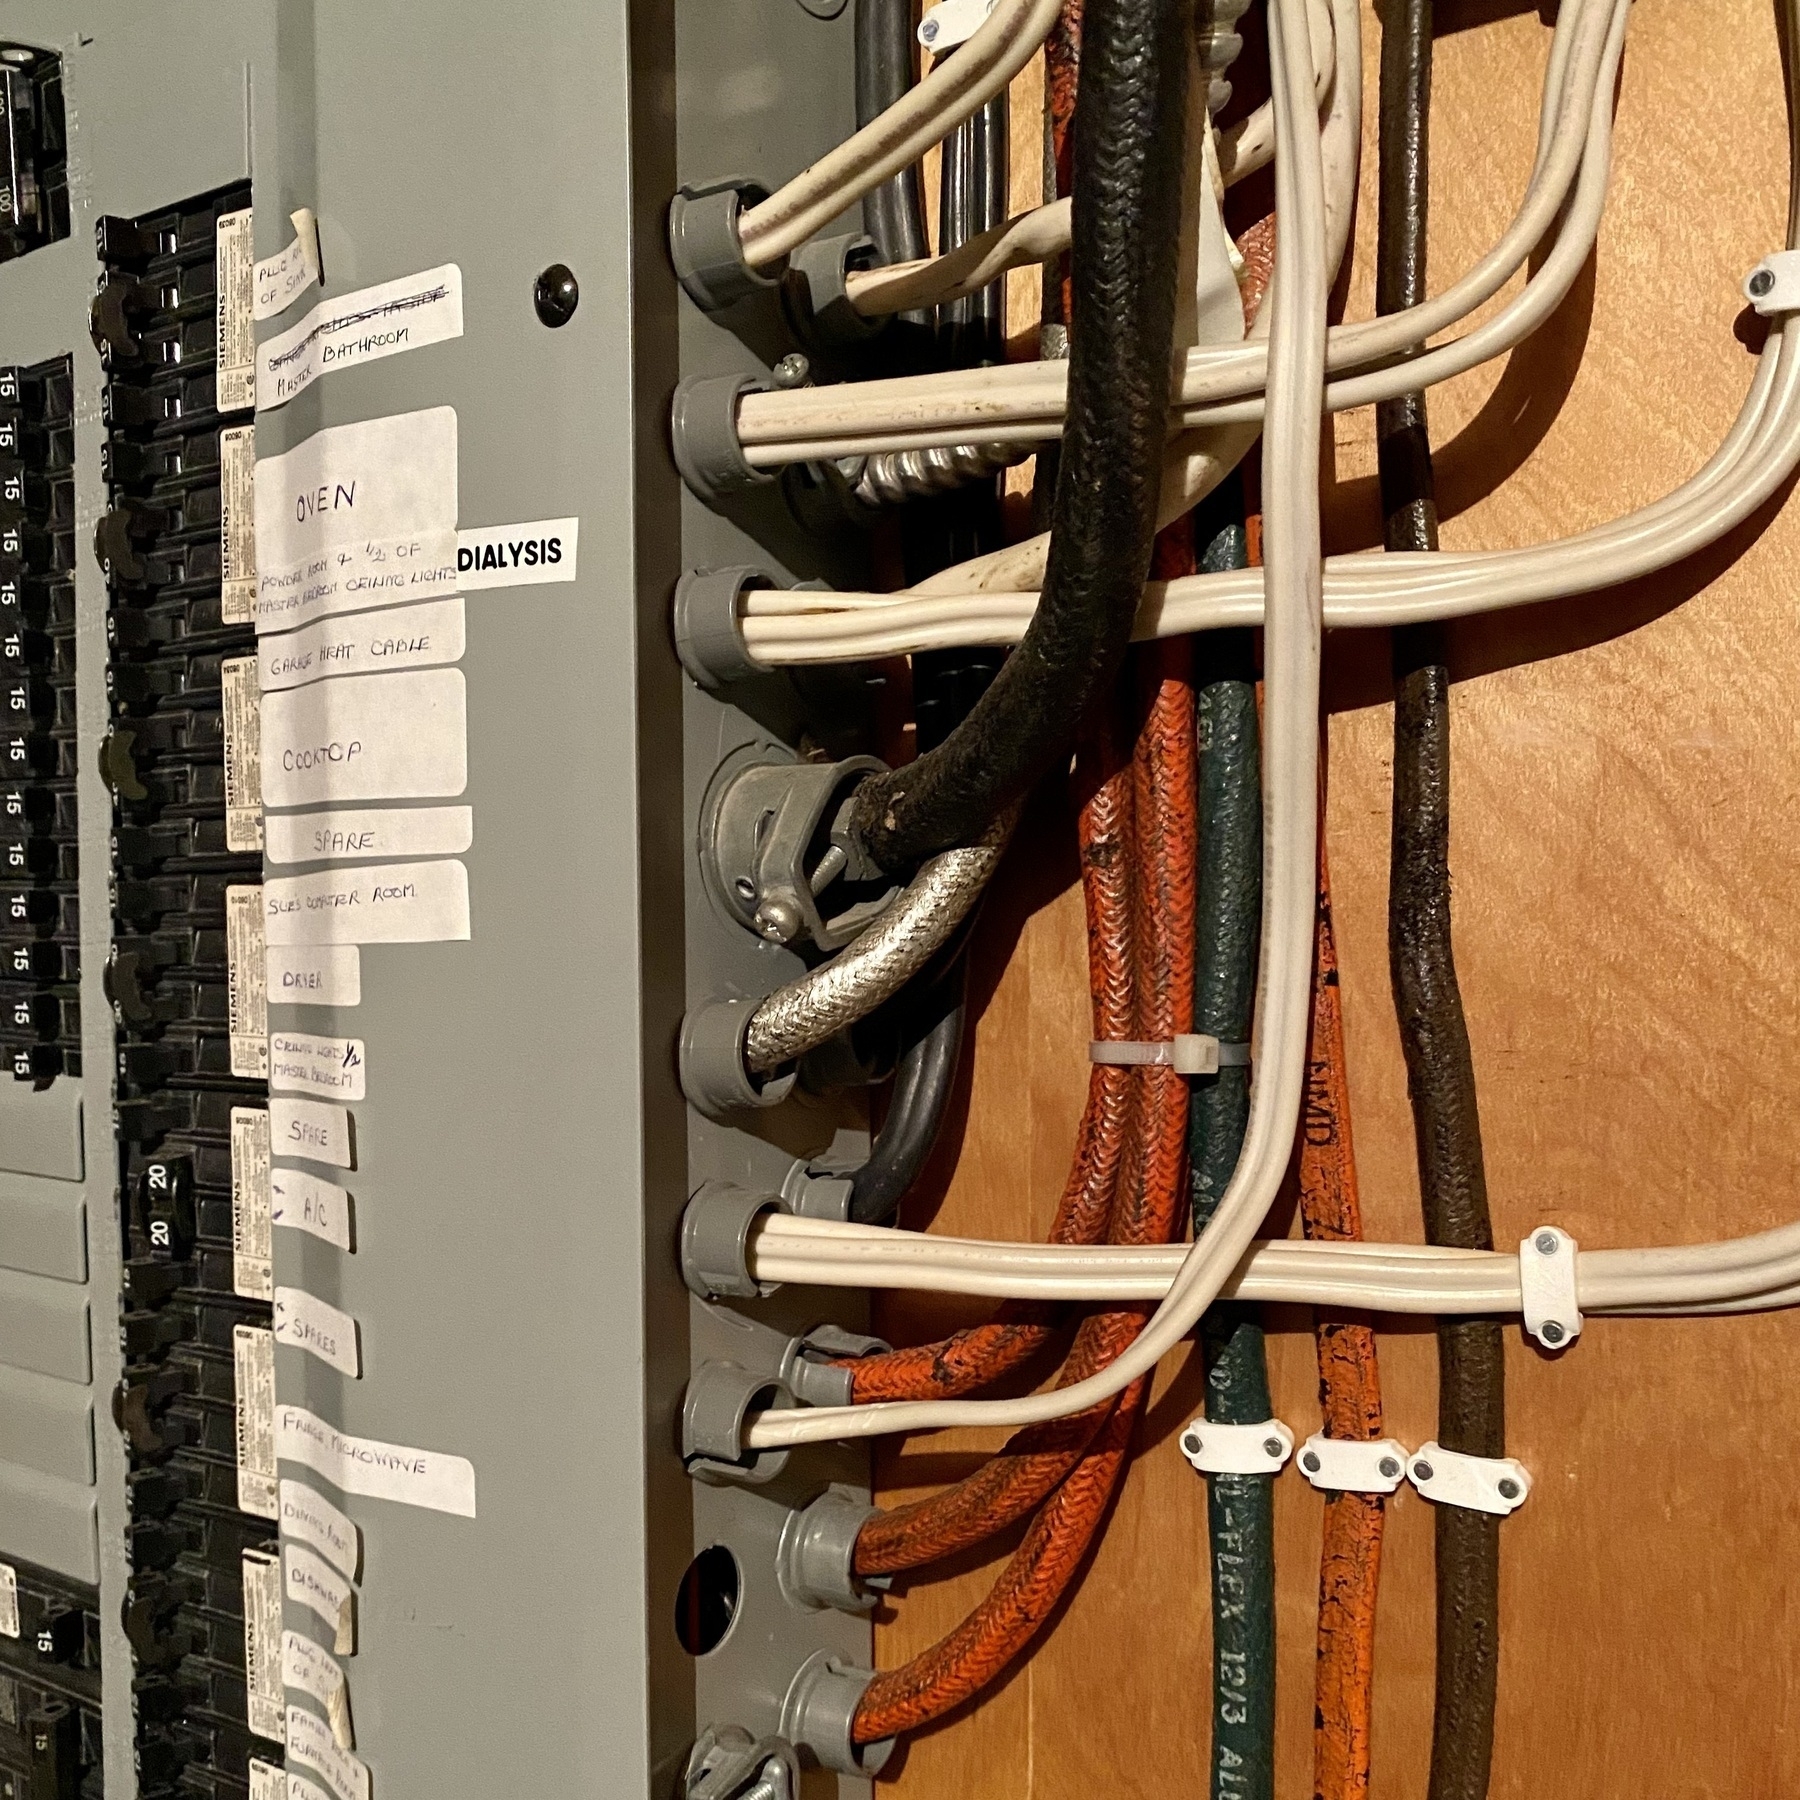 Residential circuit breaker with a maze of wires